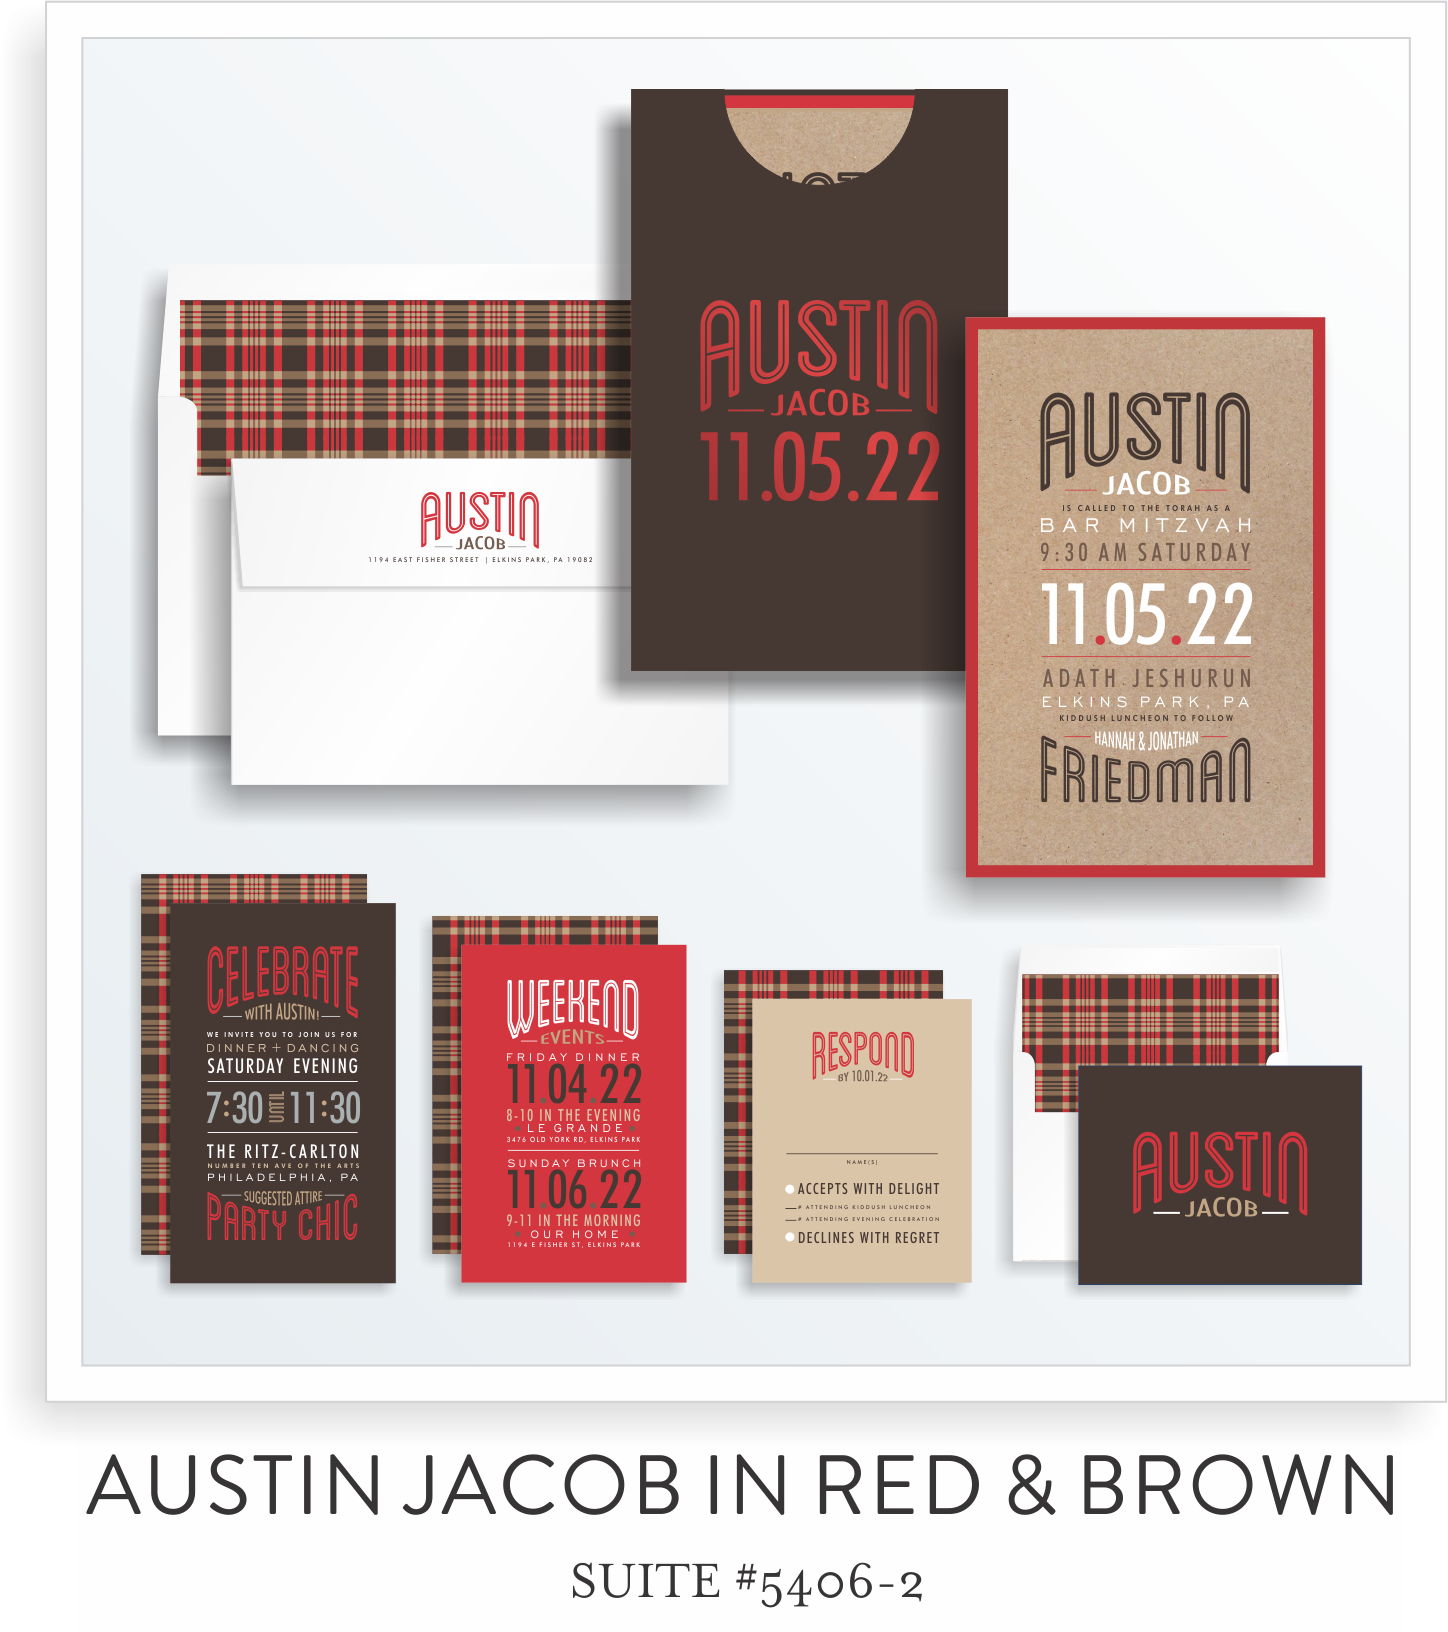 5406-2 AUSTIN JACOB IN RED & BROWN SUITE THUMB.png